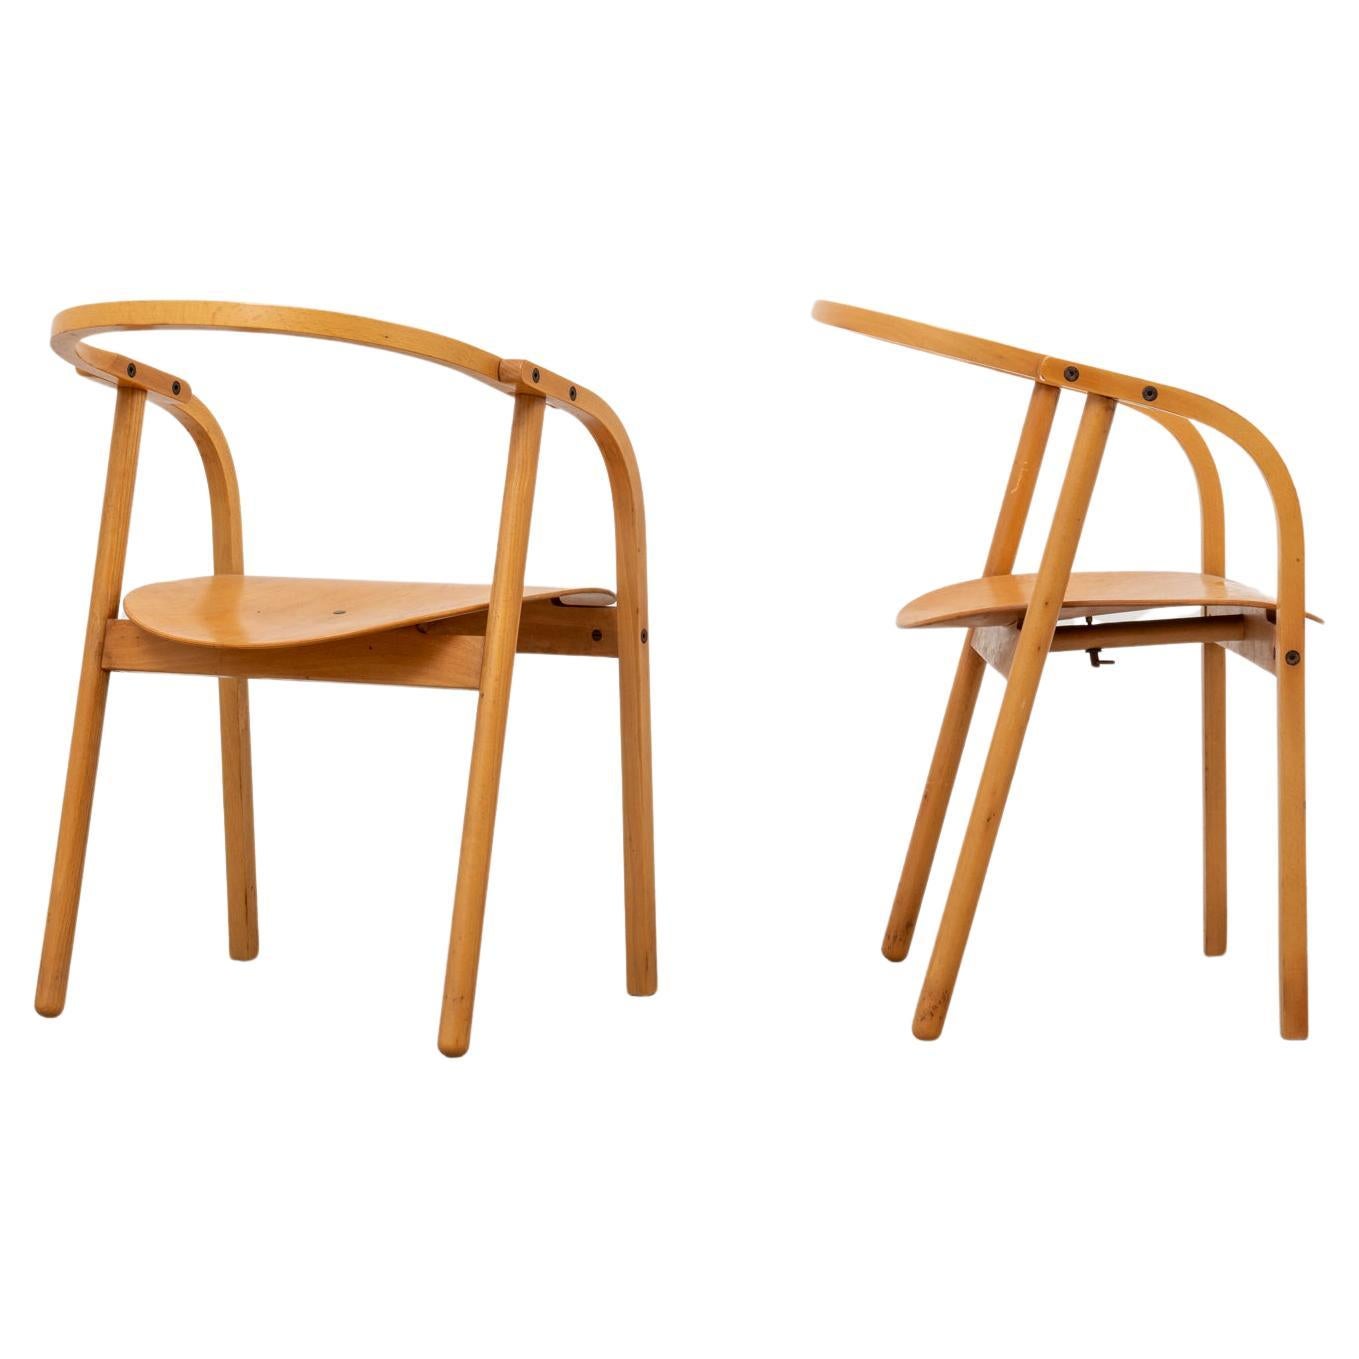 4 “Otto” Organic Wood Armchairs by Werther Toffoloni & Piero Palange for Ibis  For Sale